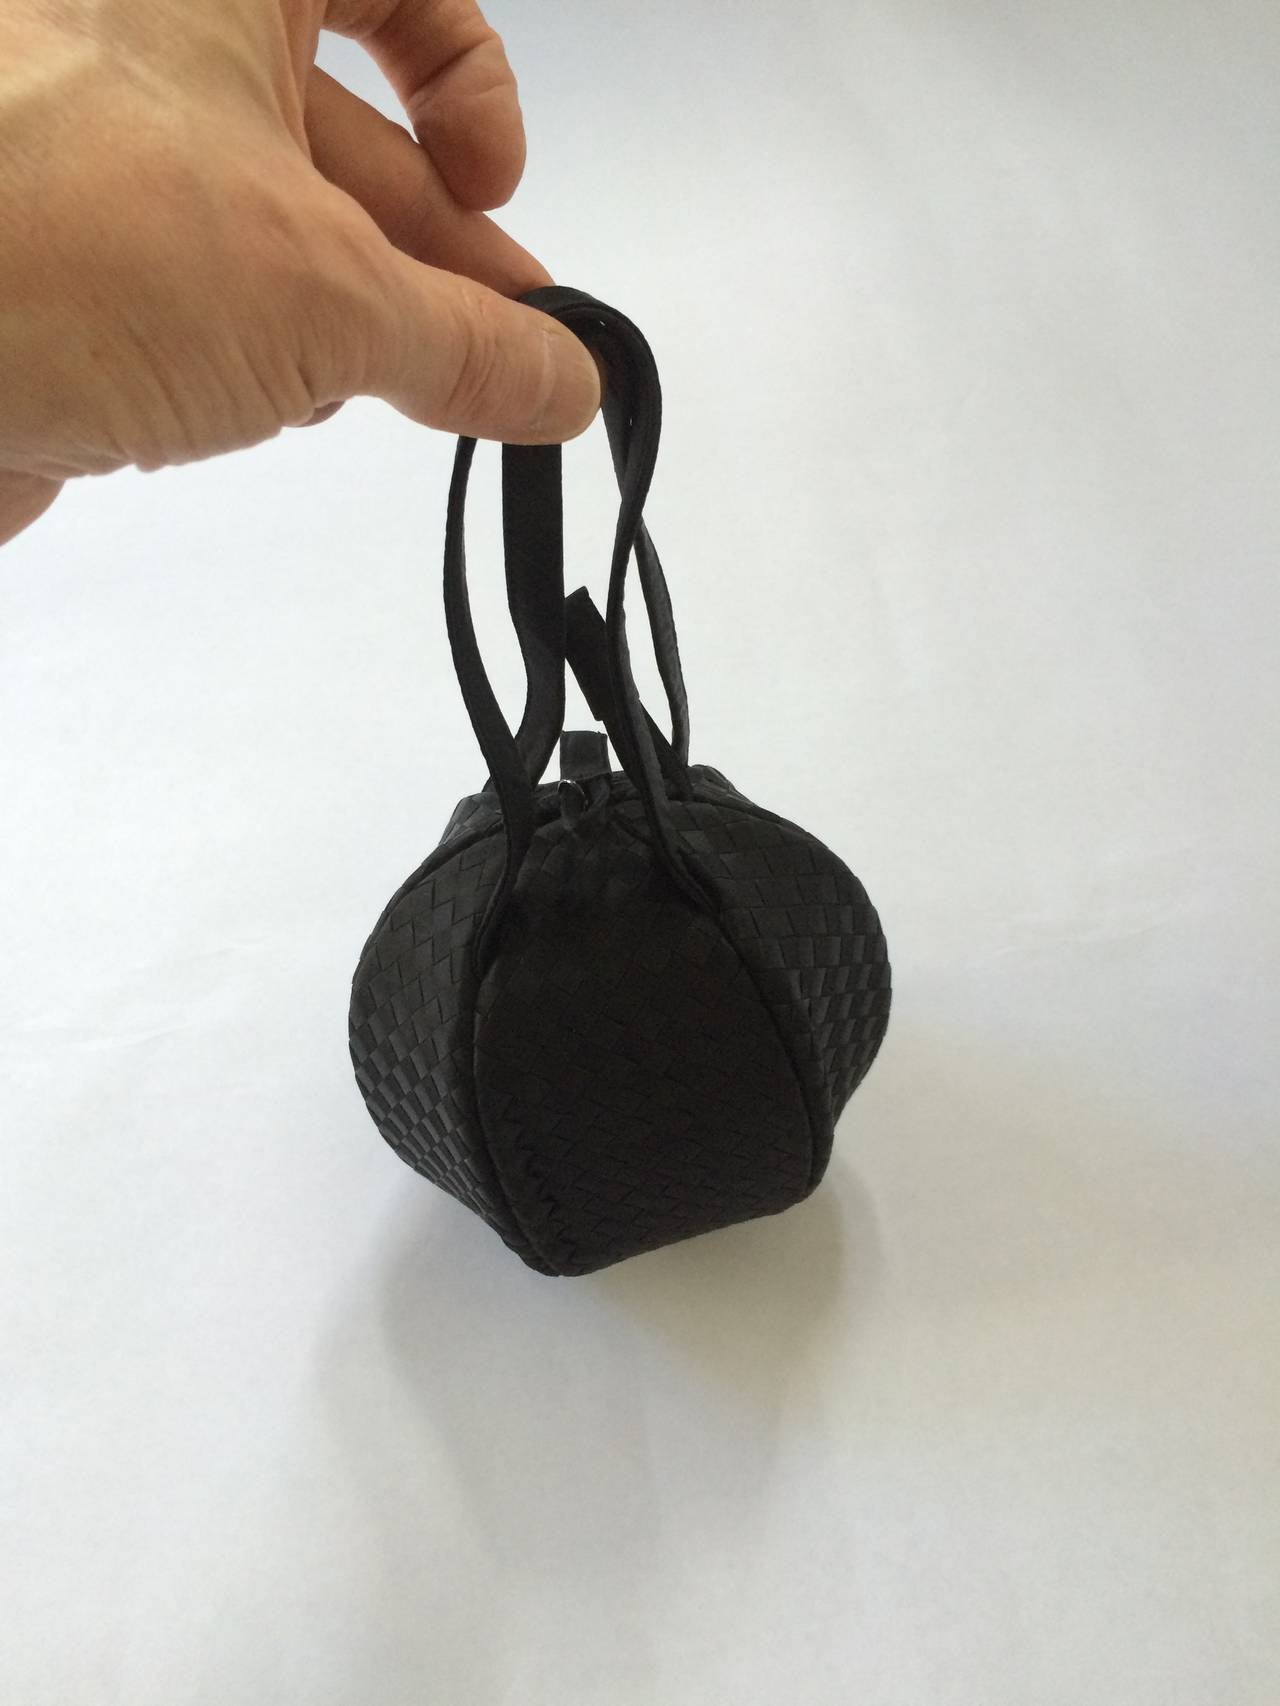 Bottega Veneta 90s silk woven round evening bag made in Italy.  This round woven evening bag was a rare / unique design and not a lot on the open market. Bottega Veneta has created a new standard of luxury since its founding in Vicenza in 1966.